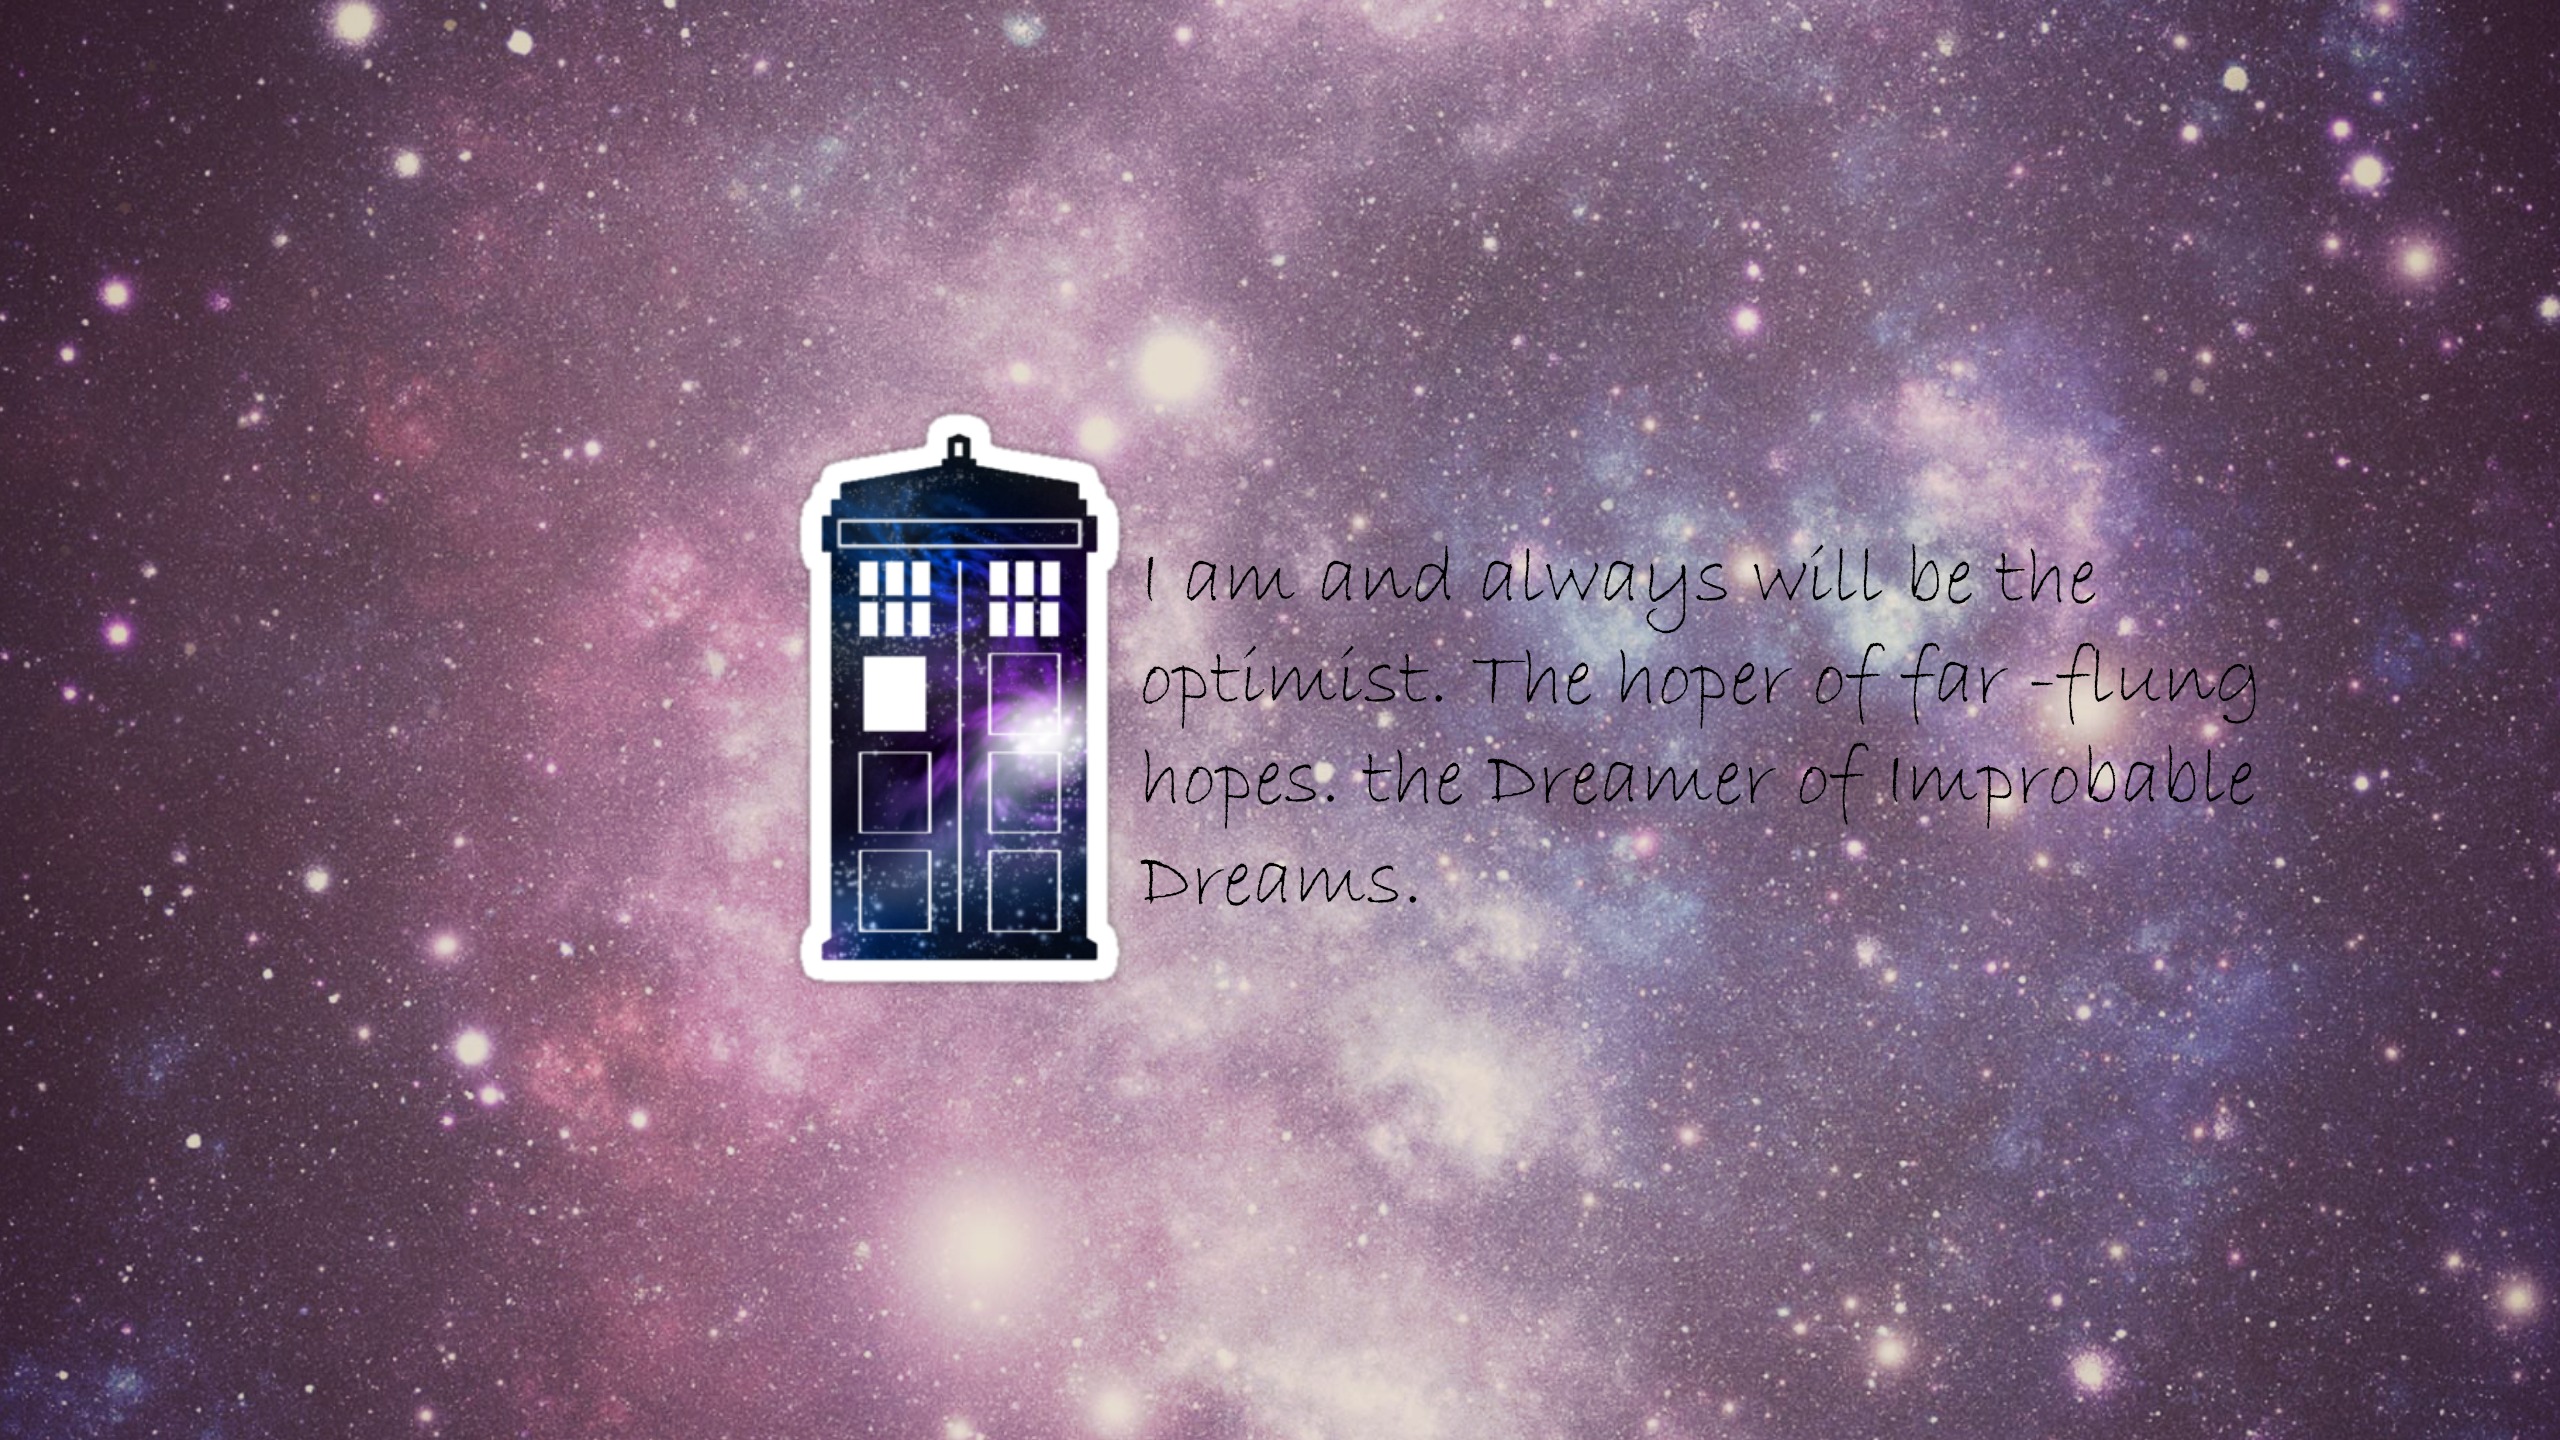 a wallpaper i made   Doctor Who Wallpaper 36078109 2560x1440